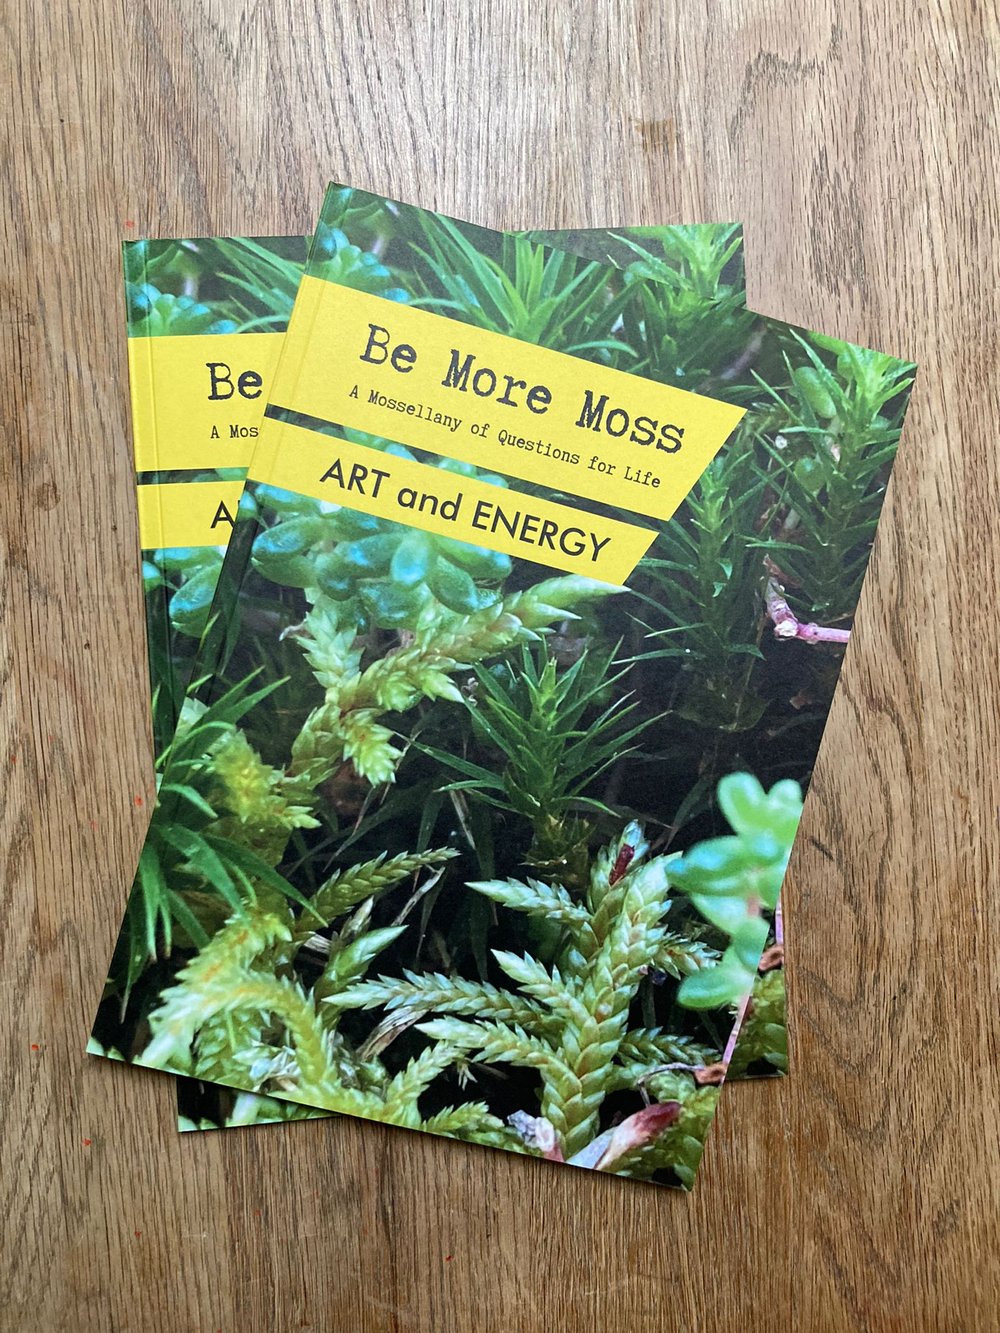 Be More Moss - A Mossellany of Questions for Life